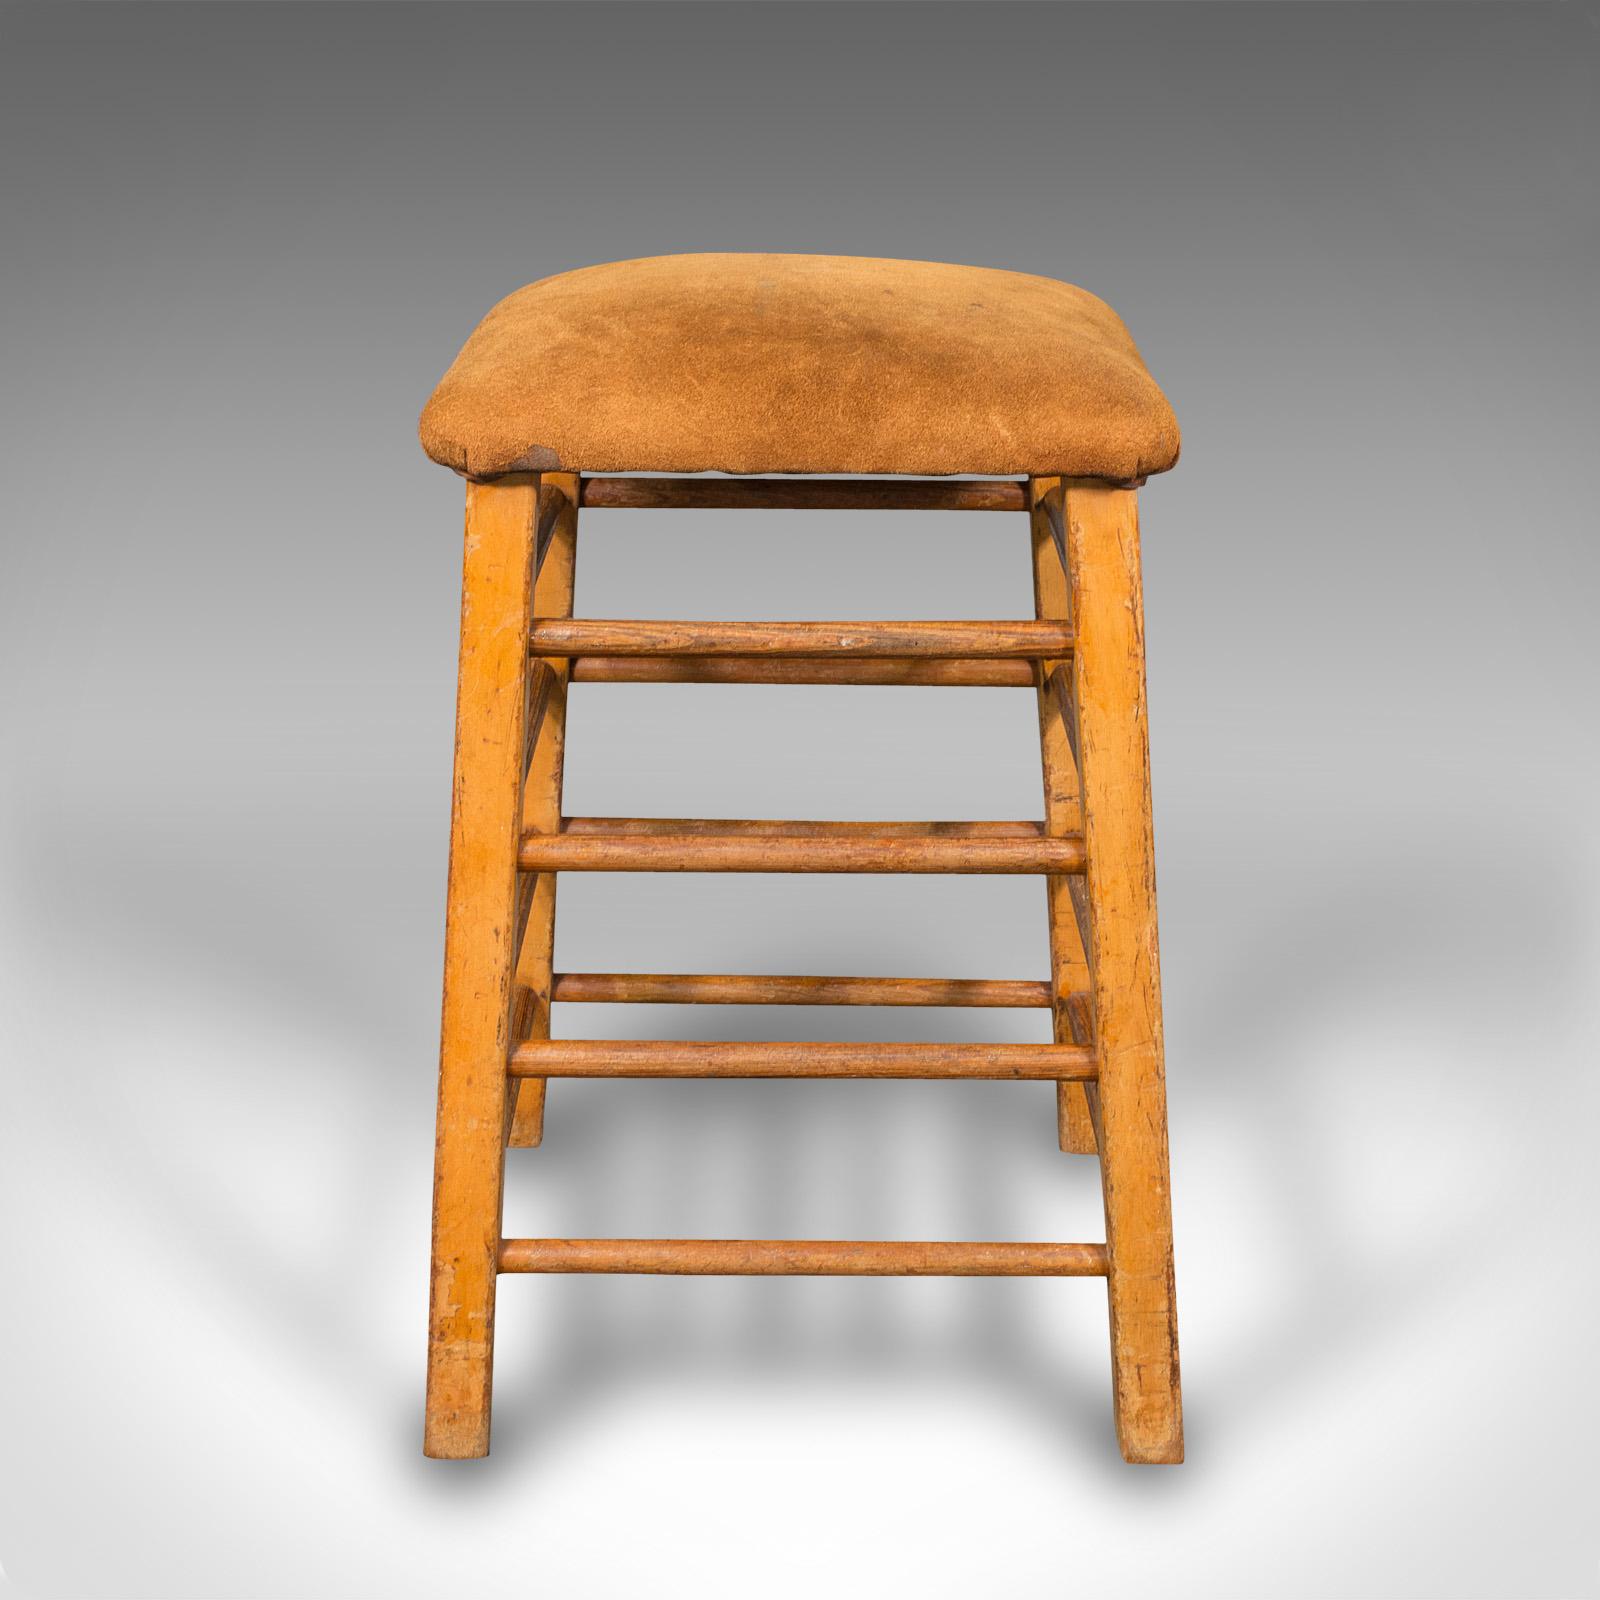 Large Vintage Artist's Stool, English, Pitch Pine, Suede, Gym, Lab Seat, C.1960 In Good Condition For Sale In Hele, Devon, GB